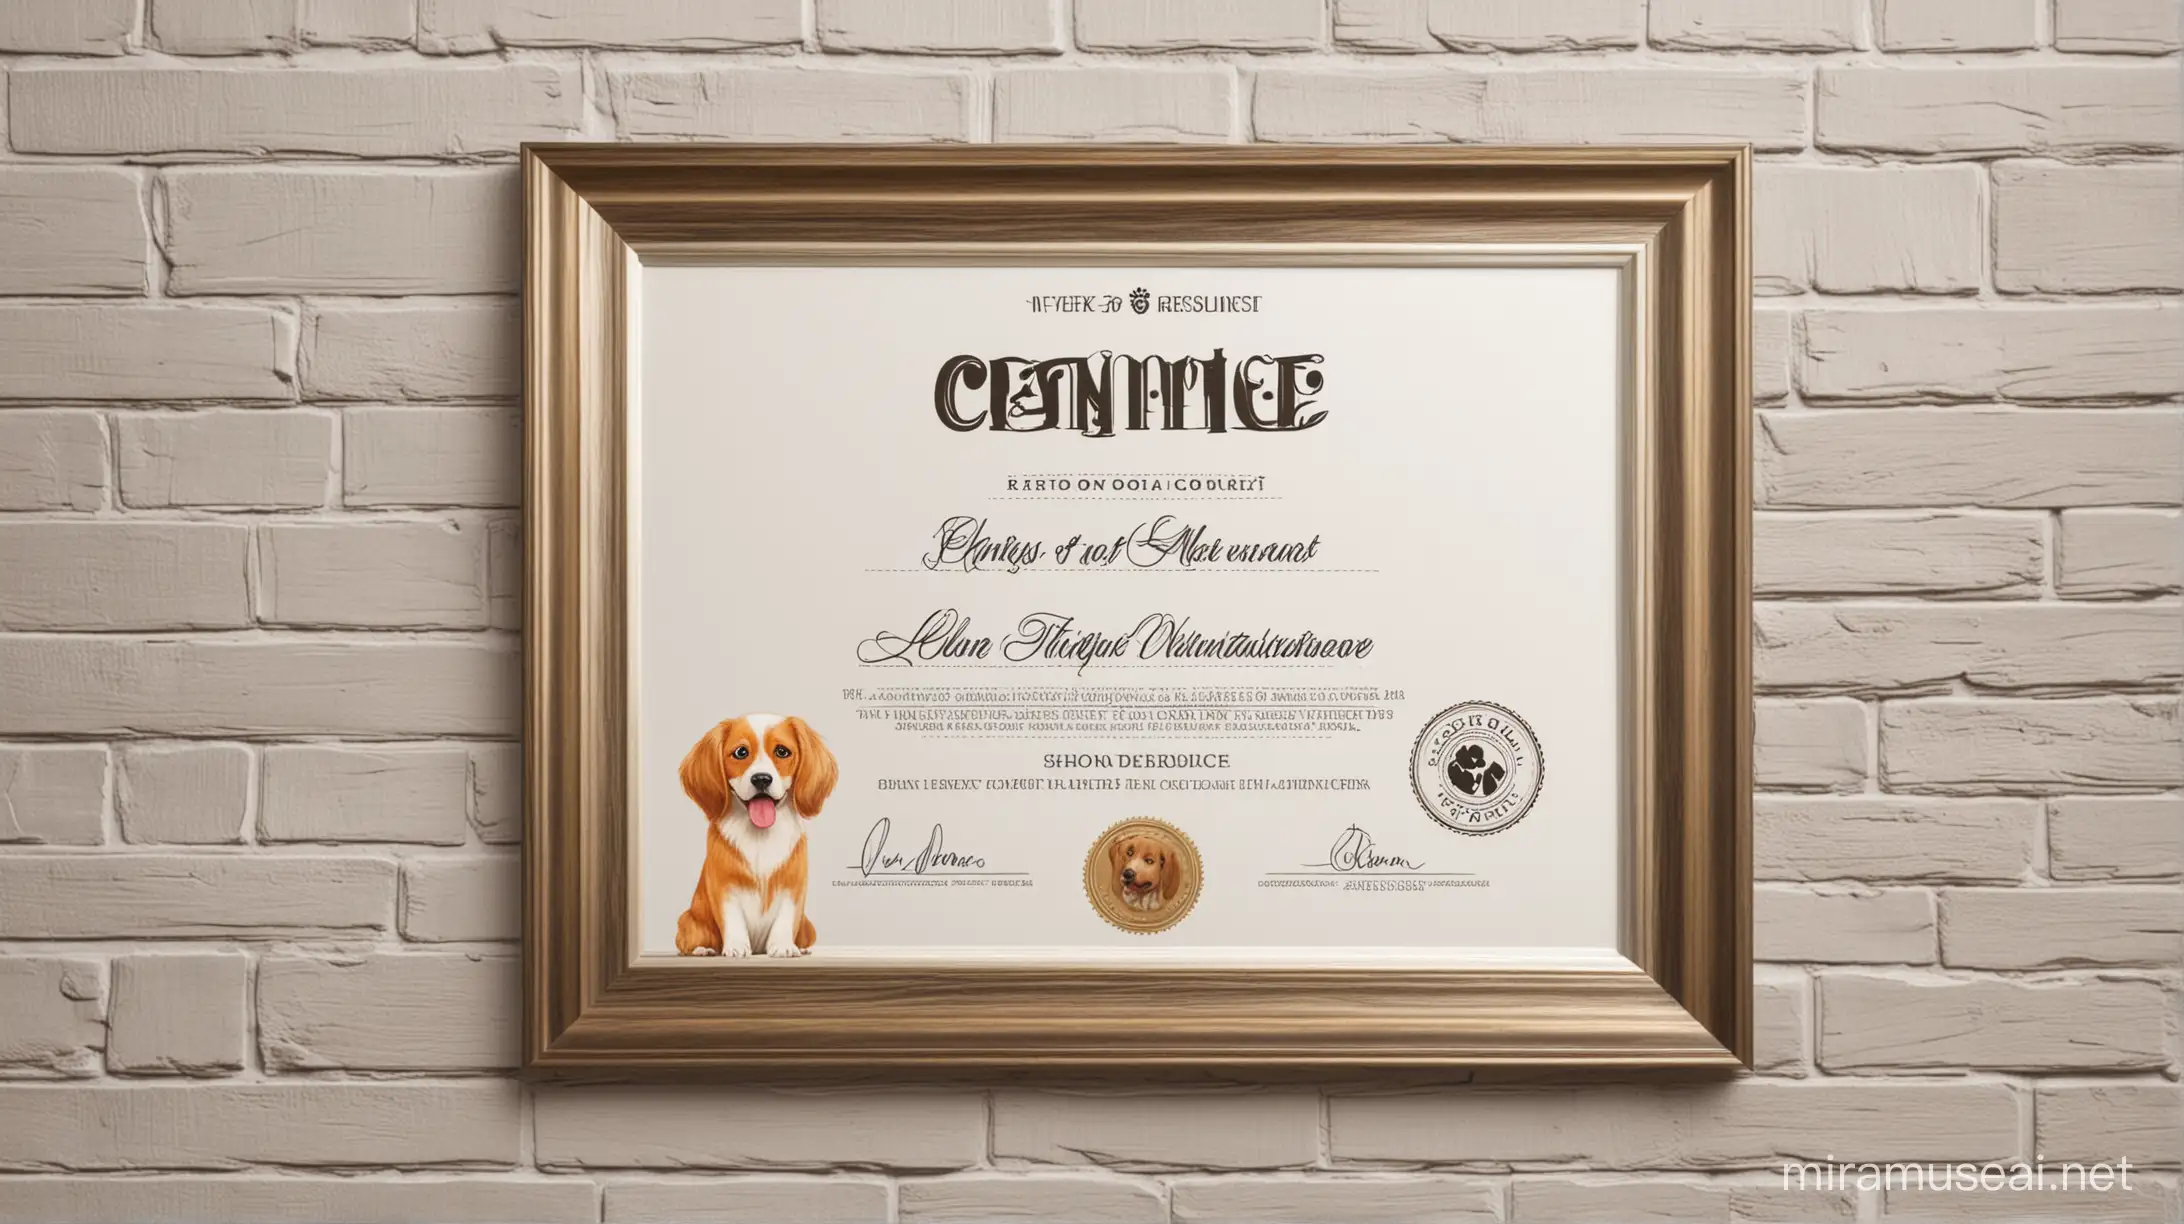 Luxury Dog Care Certificate Displayed on Wall